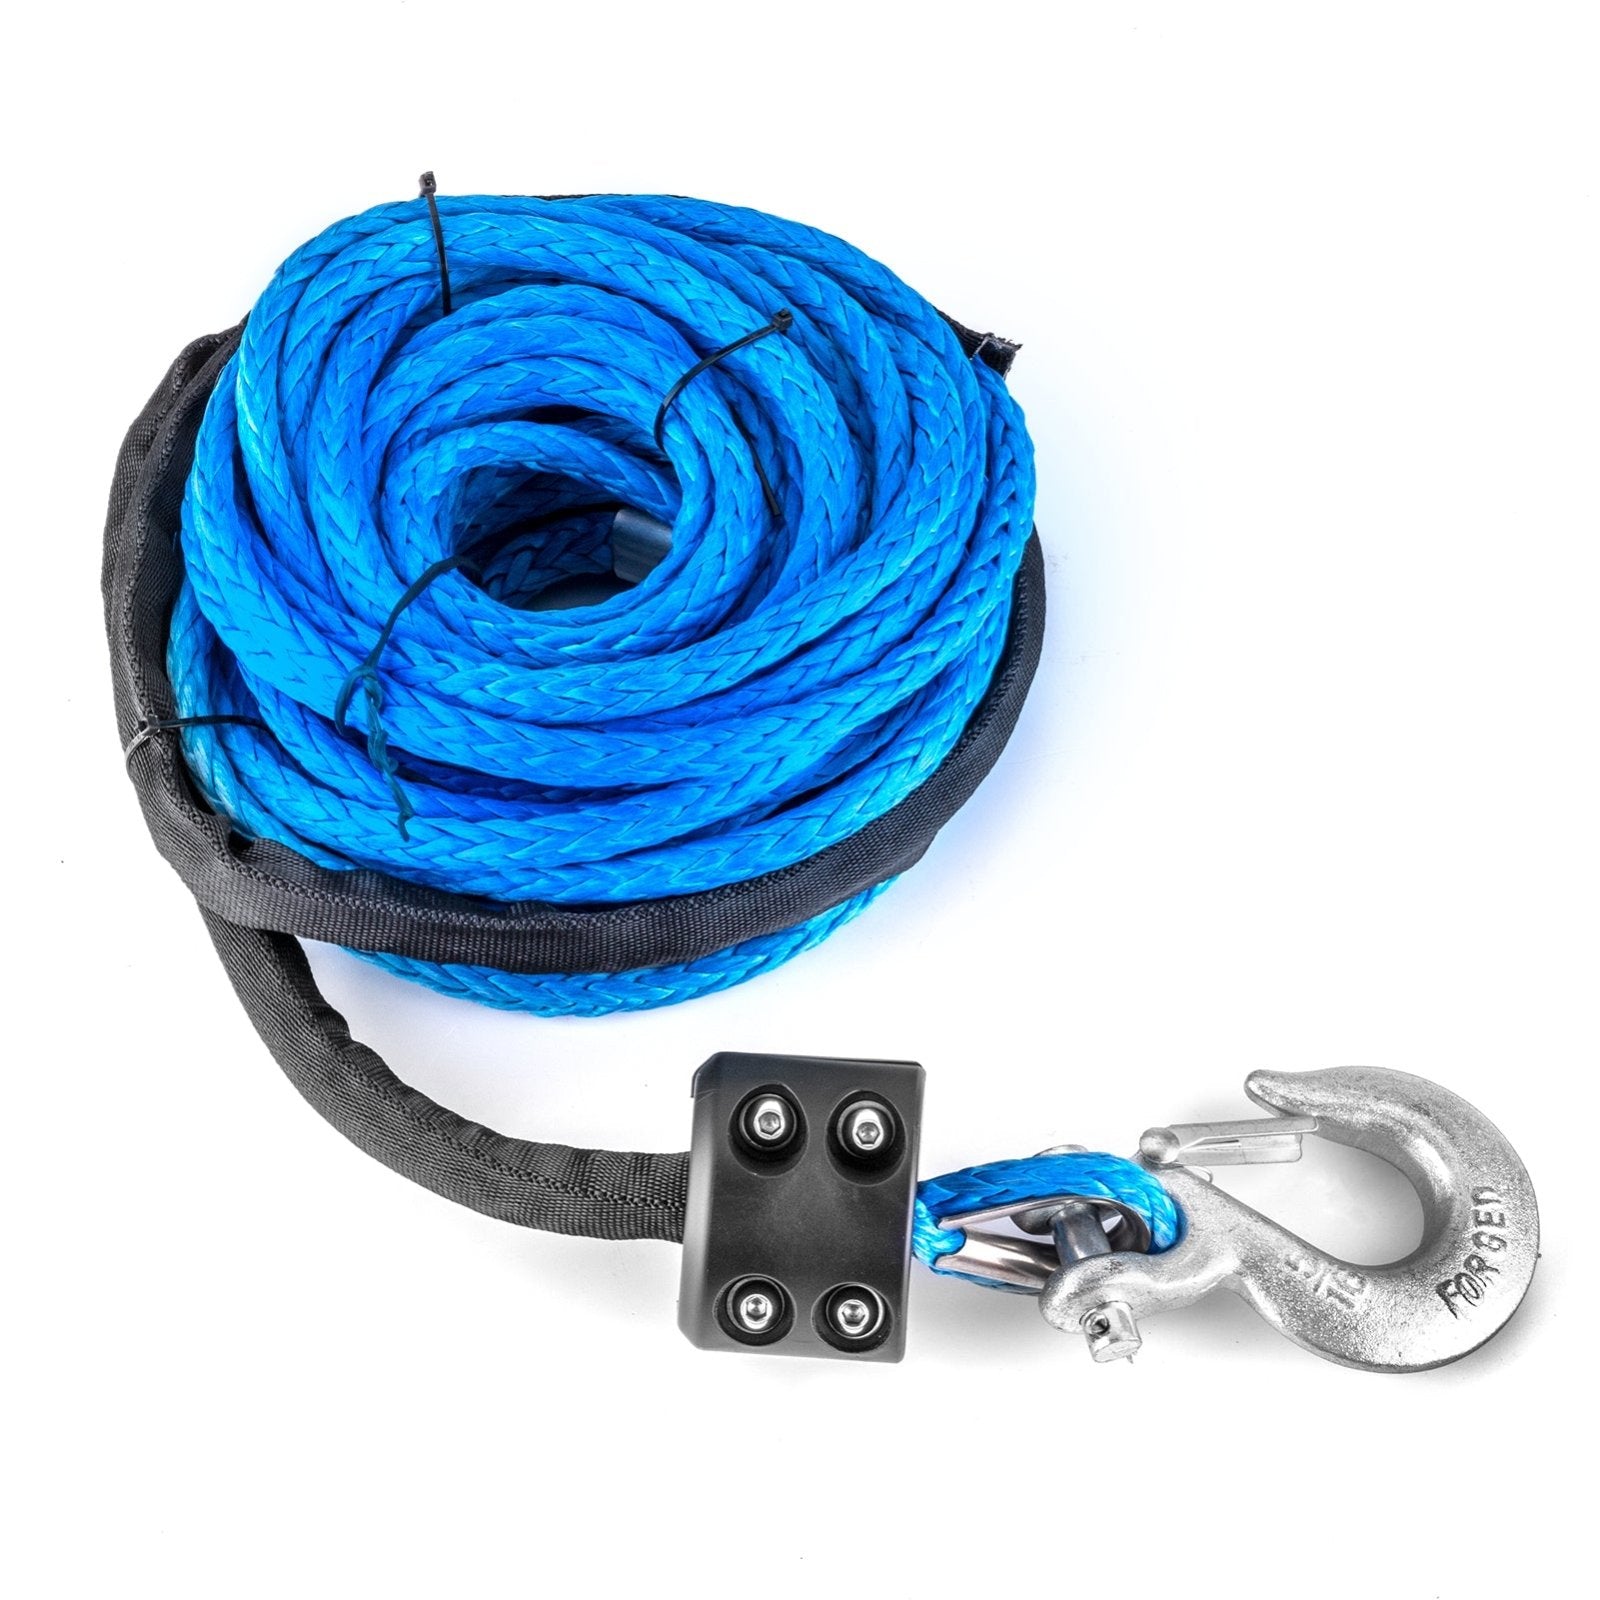 5/16" x 50' 8500LBs Synthetic Winch Rope + Hook + Stopper for ATV UTV SUV Truck Winch - Weisen